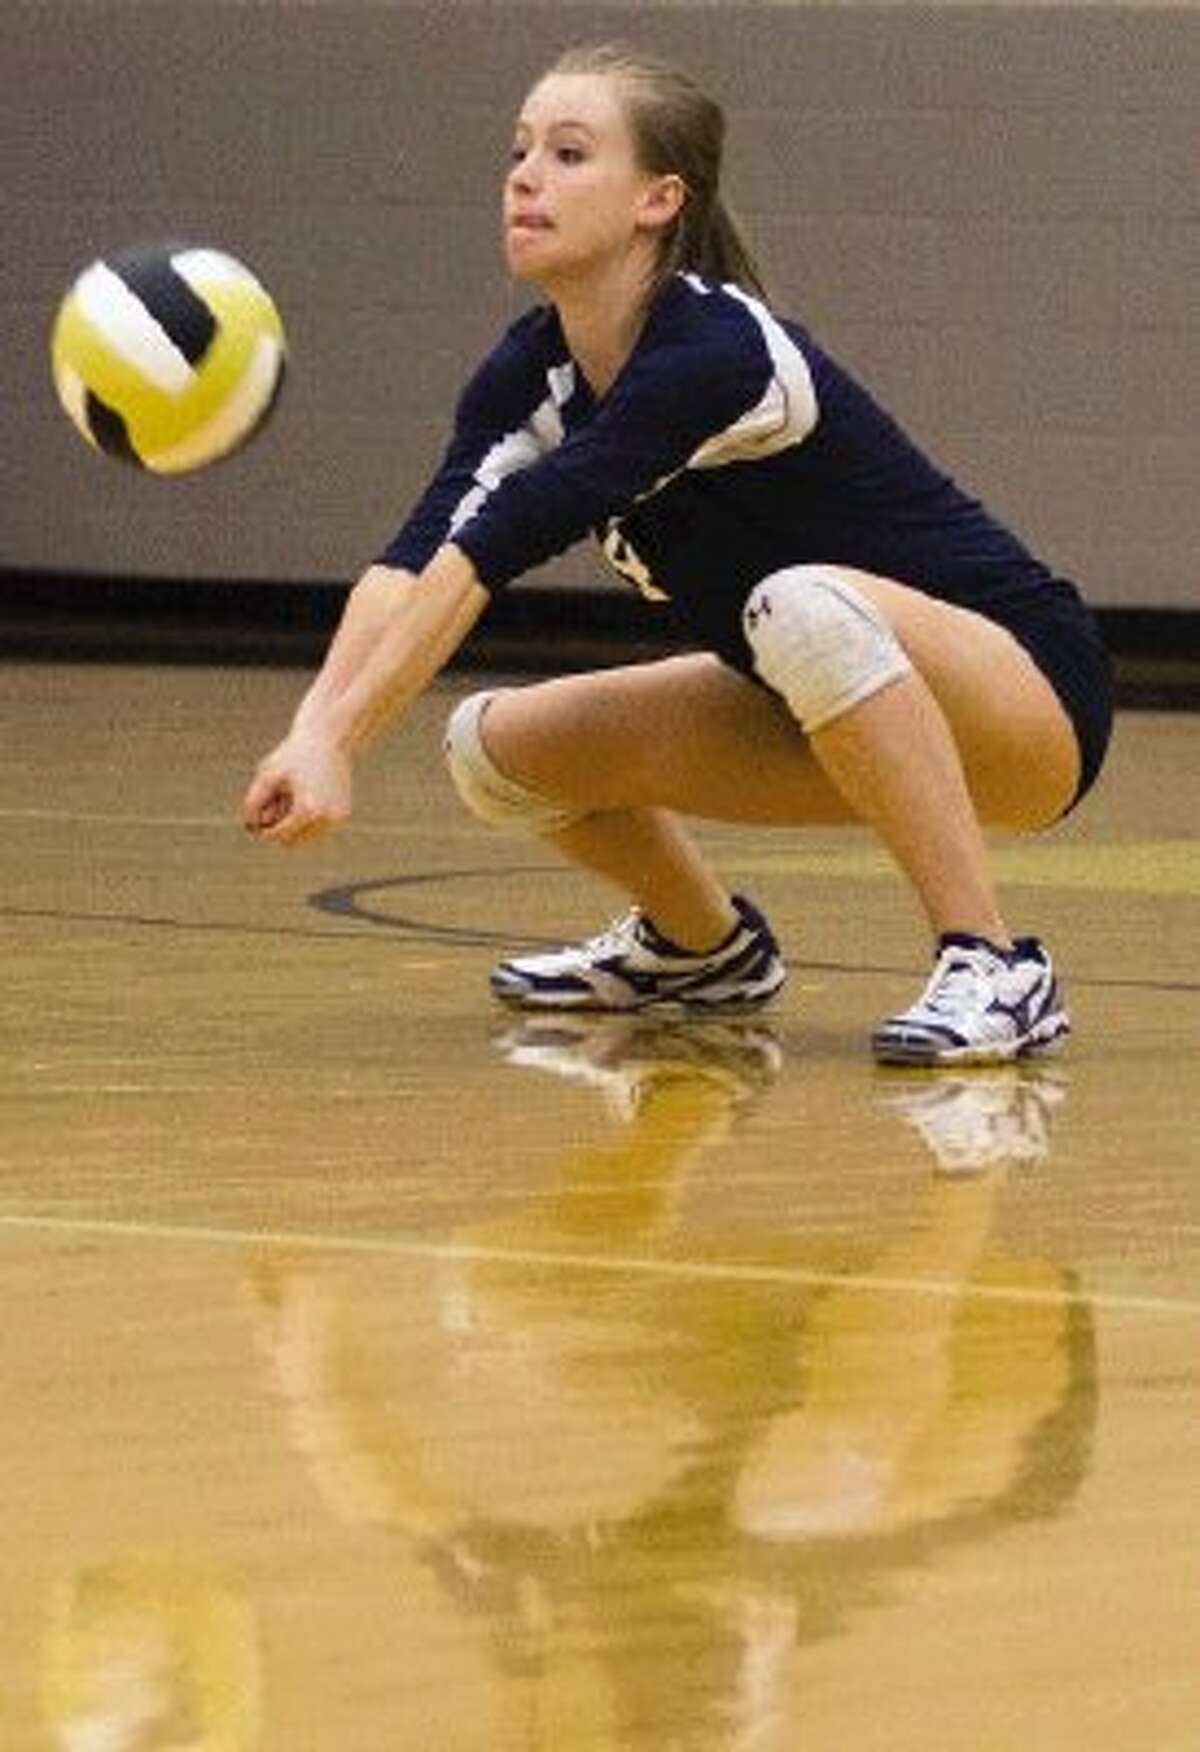 College Park’s Paige Kempker digs the ball against Conroe at Conroe High School on Tuesday night. To view or purchase this photo and others like it, visit HCNpics.com.